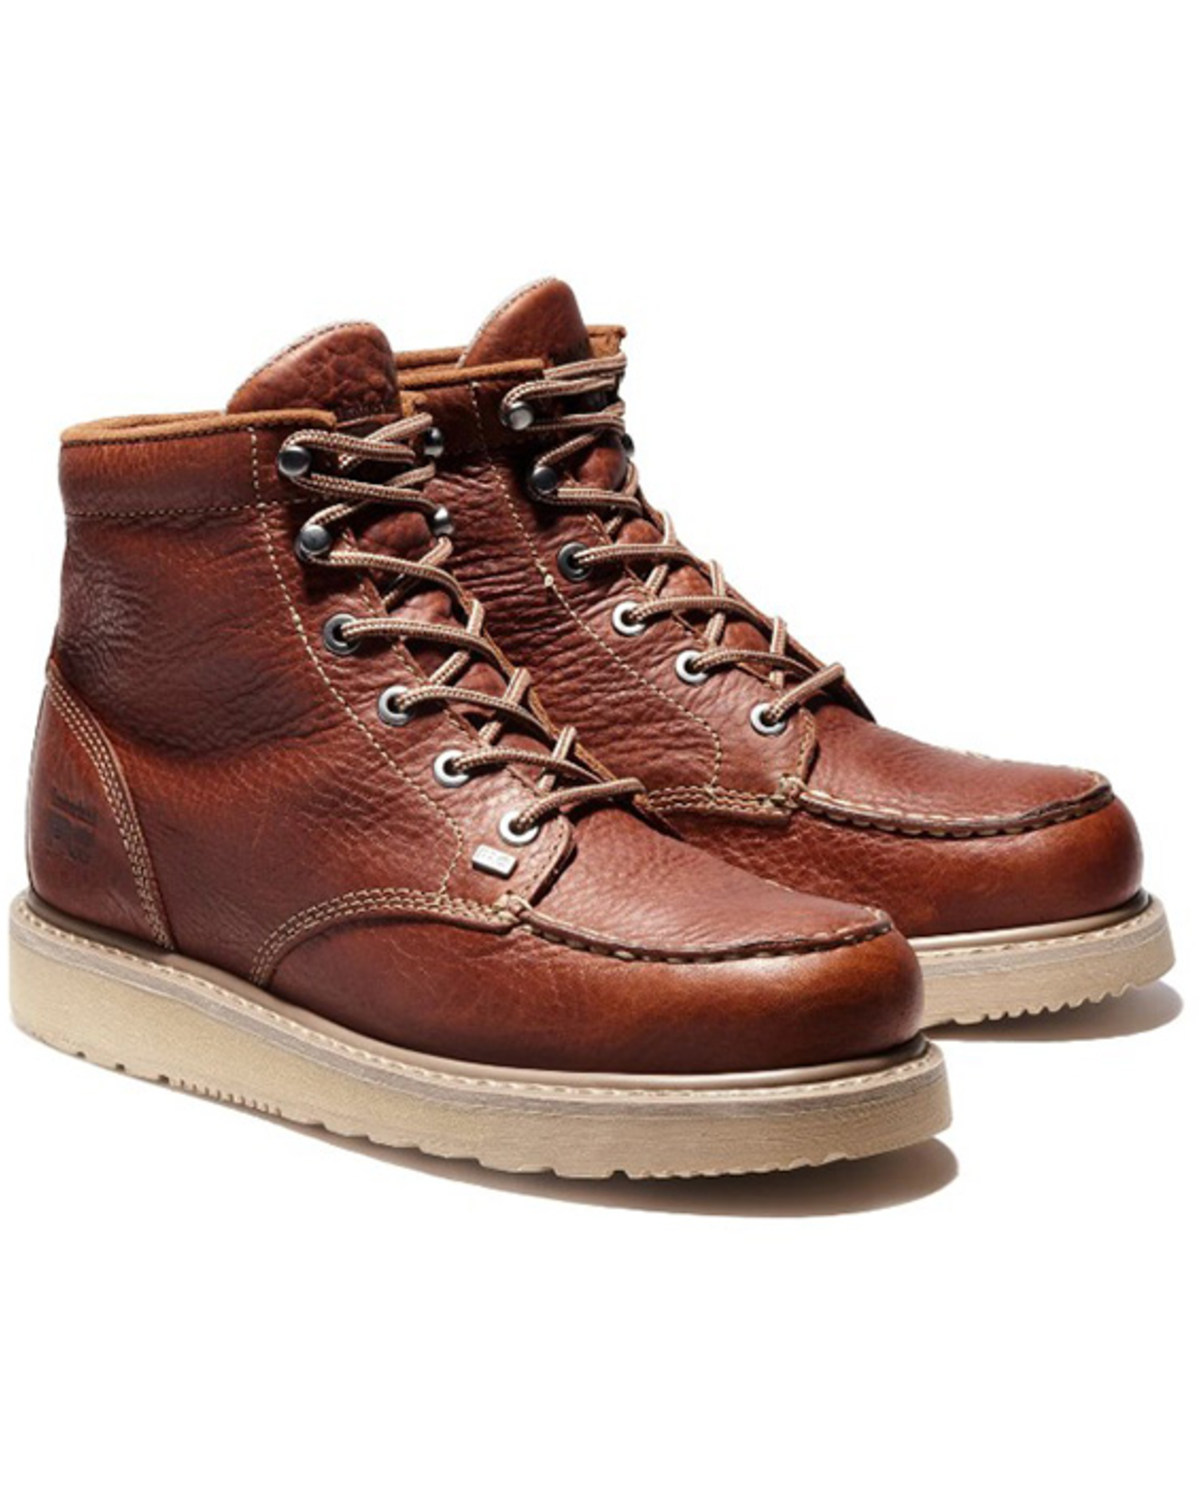 Timberland Men's 6" Barstow Moc Work Boots - Safety Toe